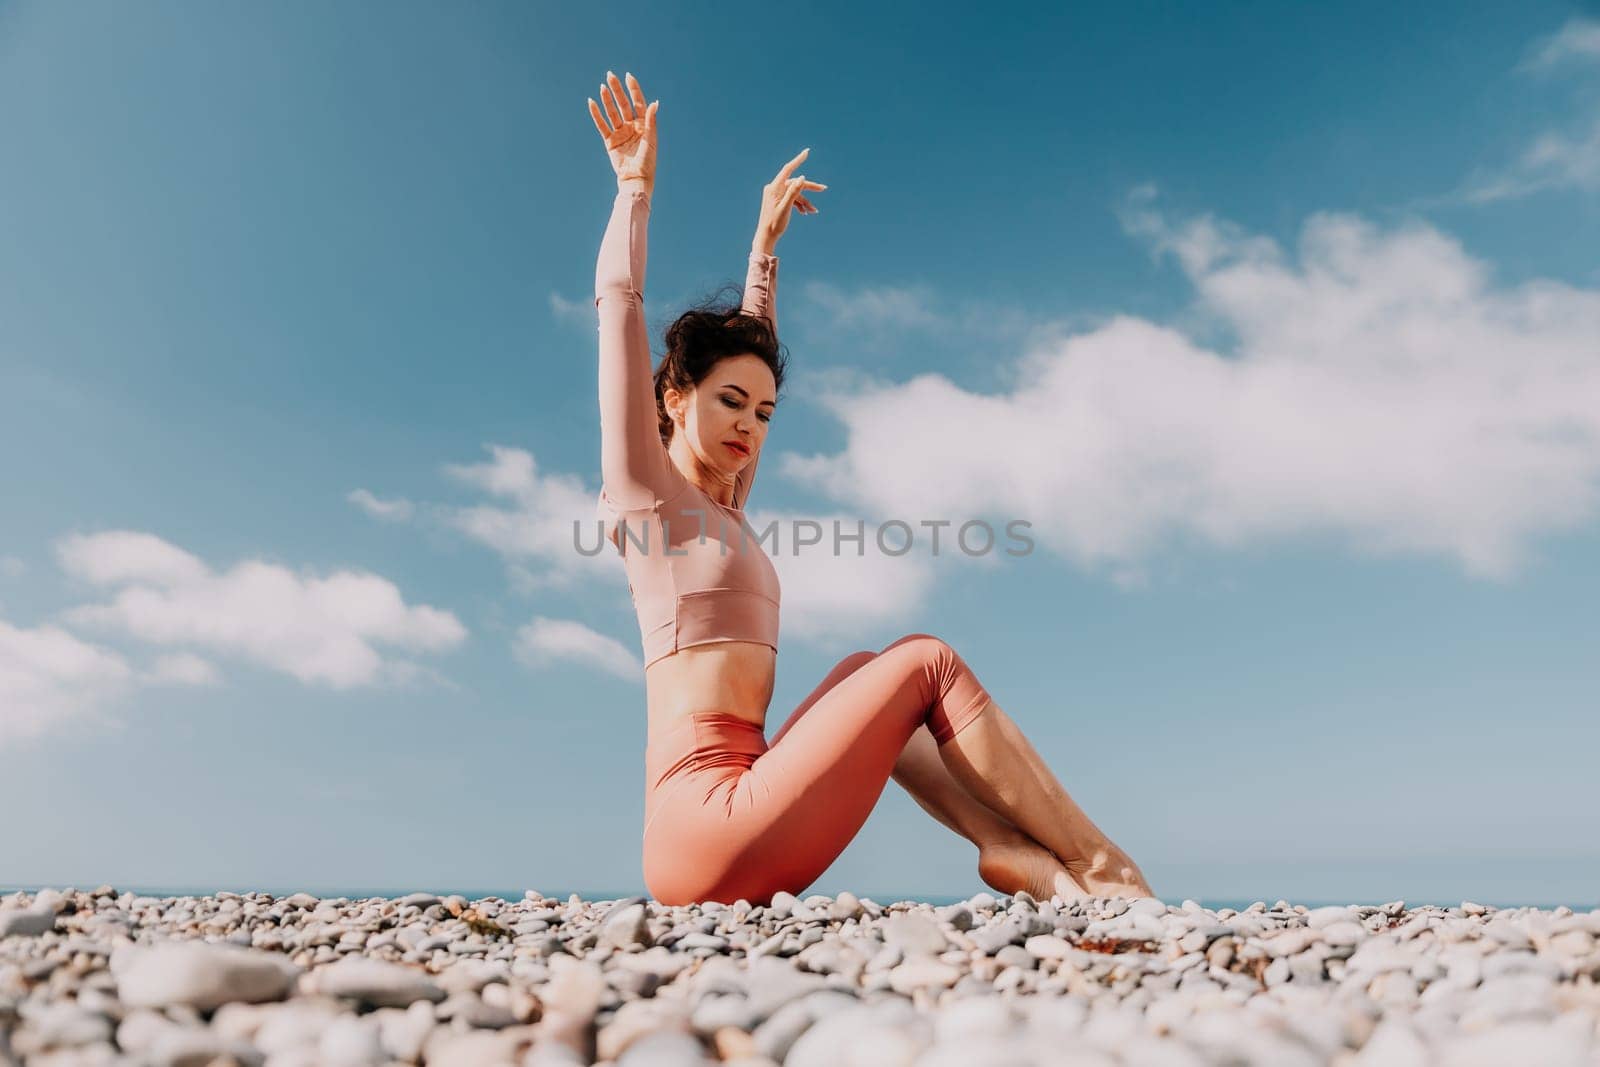 Middle aged well looking woman with black hair, fitness instructor in leggings and tops doing stretching and pilates on yoga mat near the sea. Female fitness yoga routine concept. Healthy lifestyle by panophotograph